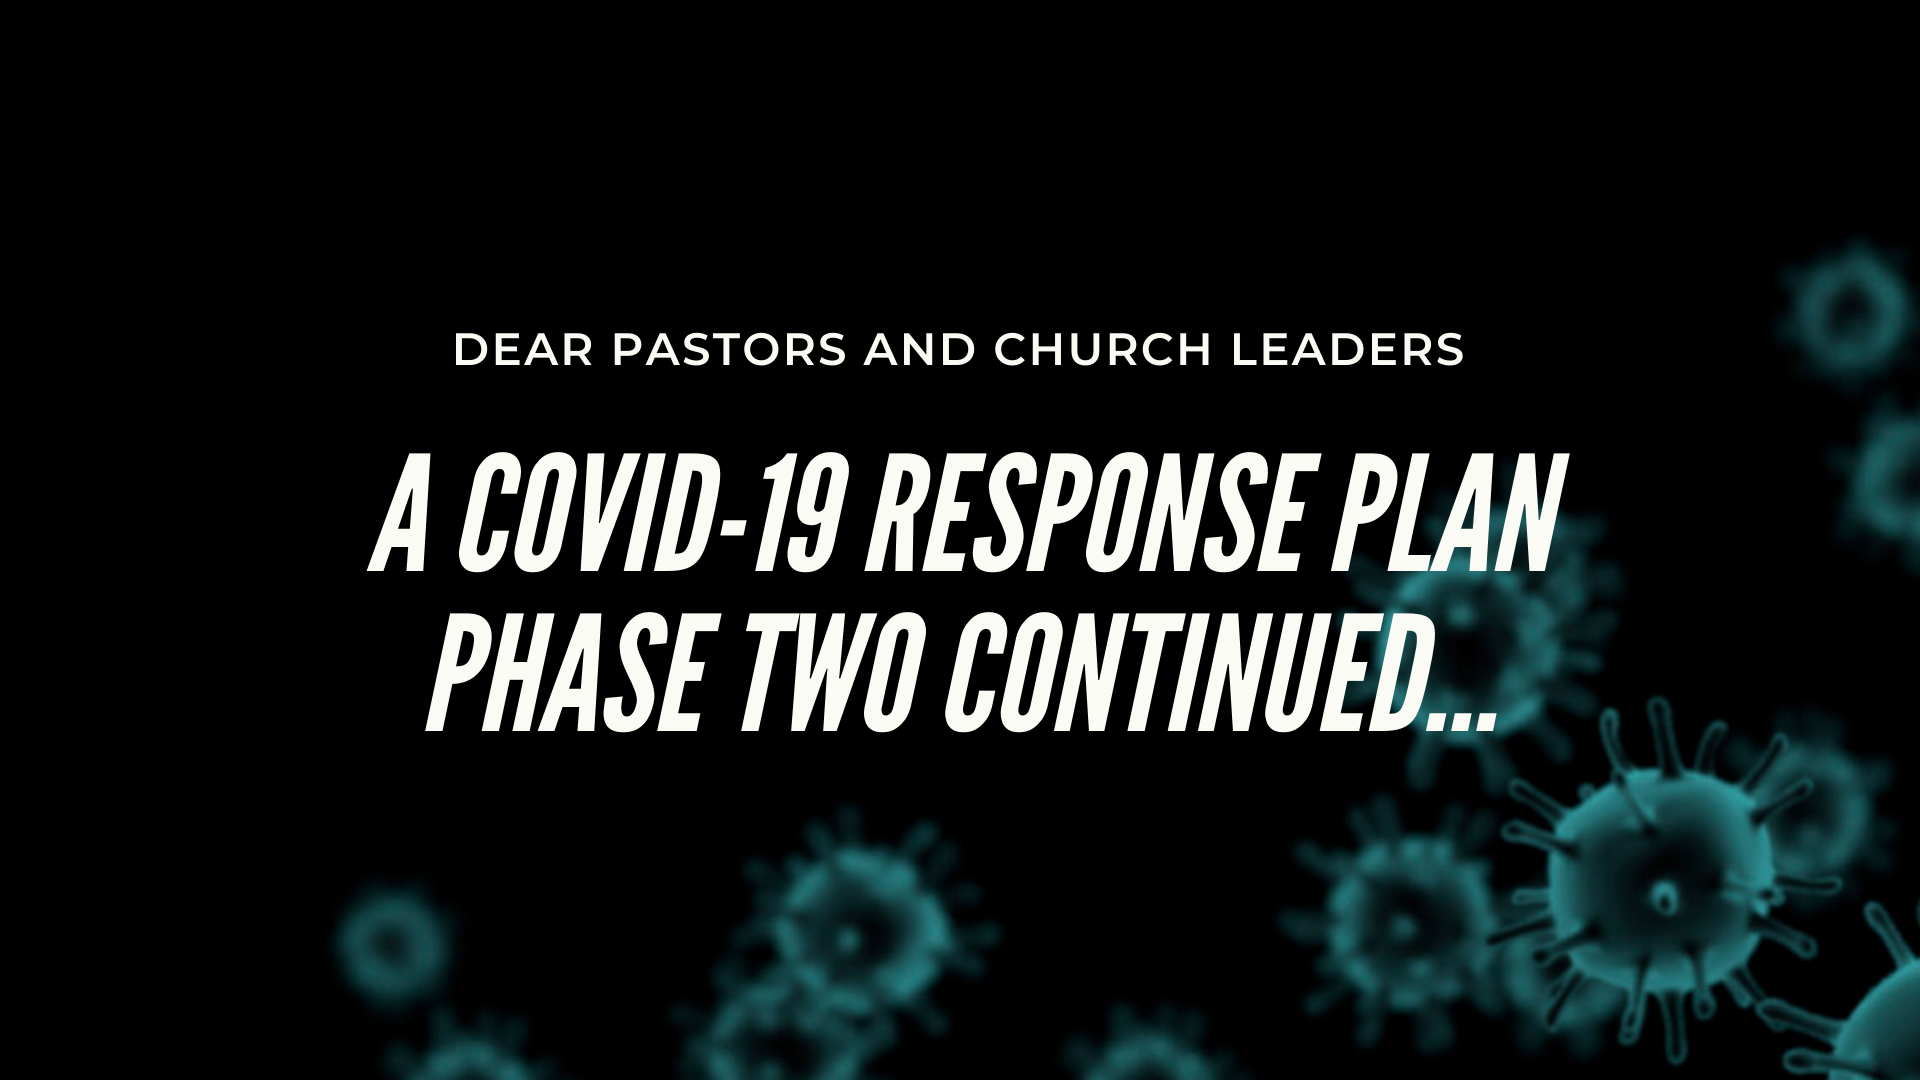 COVID-19 Phase Two, Part One: We Need Less Content and More Community